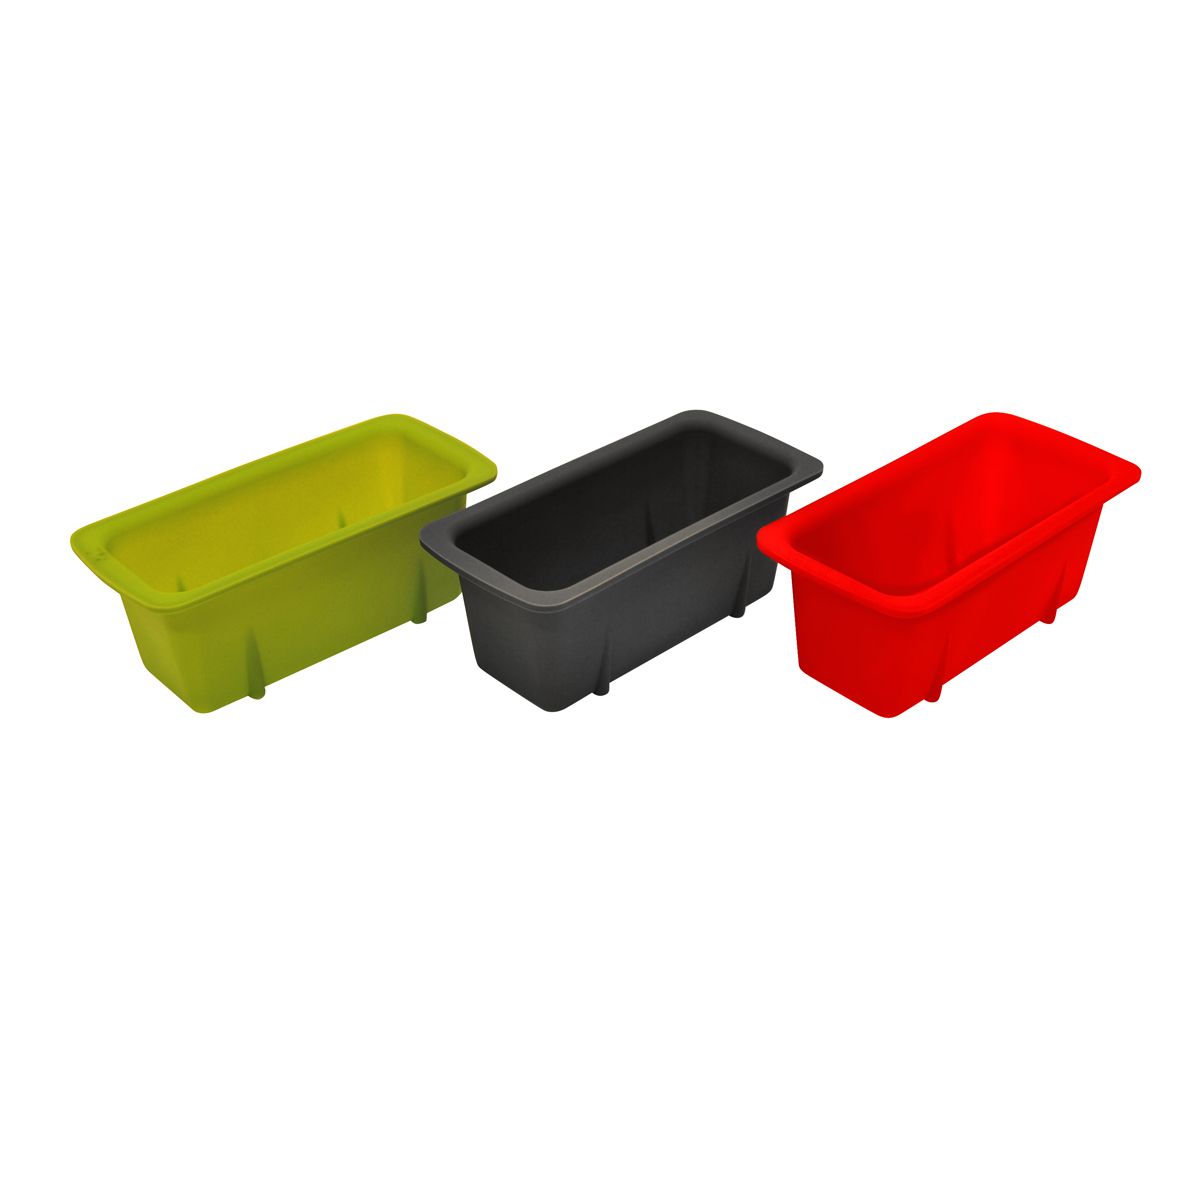 TOPQINFENGYUE Silicone Mini Loaf Pans, 12 Cavities, Red, Baking Pan, Material: Silica Gel, Item Shape: Rectangular